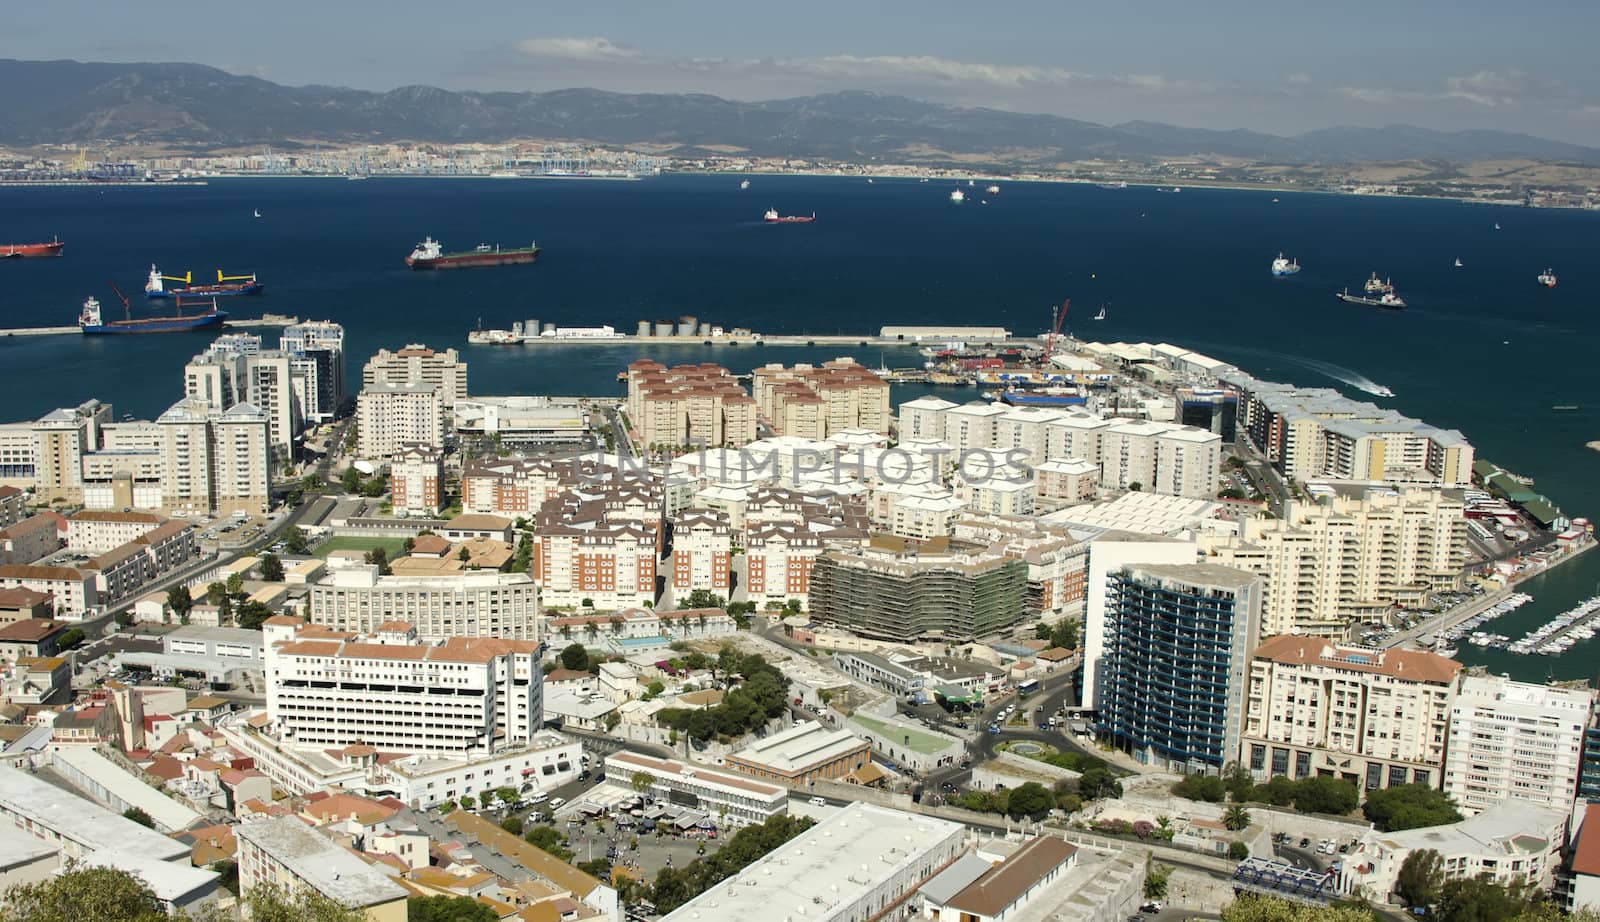 Gibraltar and its bay by njaj